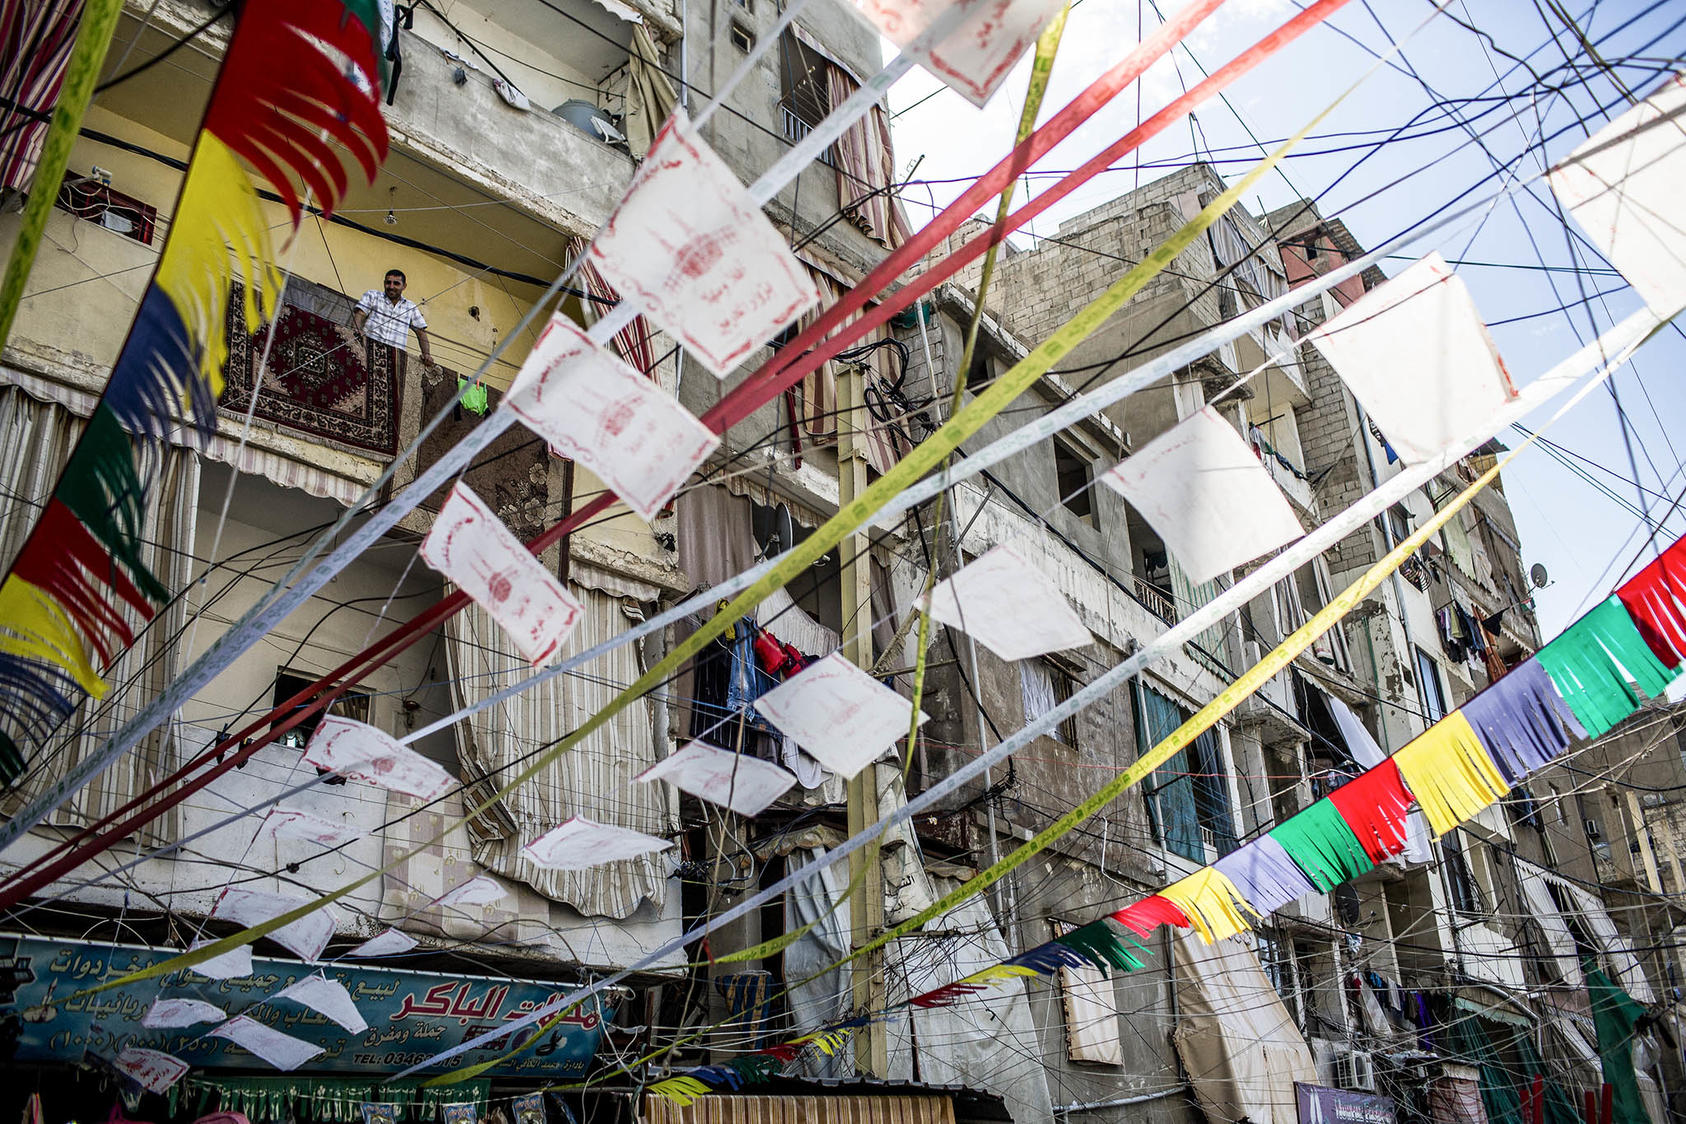 Wires strung from buildings in the Shatila refugee camp near Beirut, Lebanon, where a new wave of Syrian refugees has swollen the population, Oct. 22, 2014.  (Bryan Denton/The New York Times)